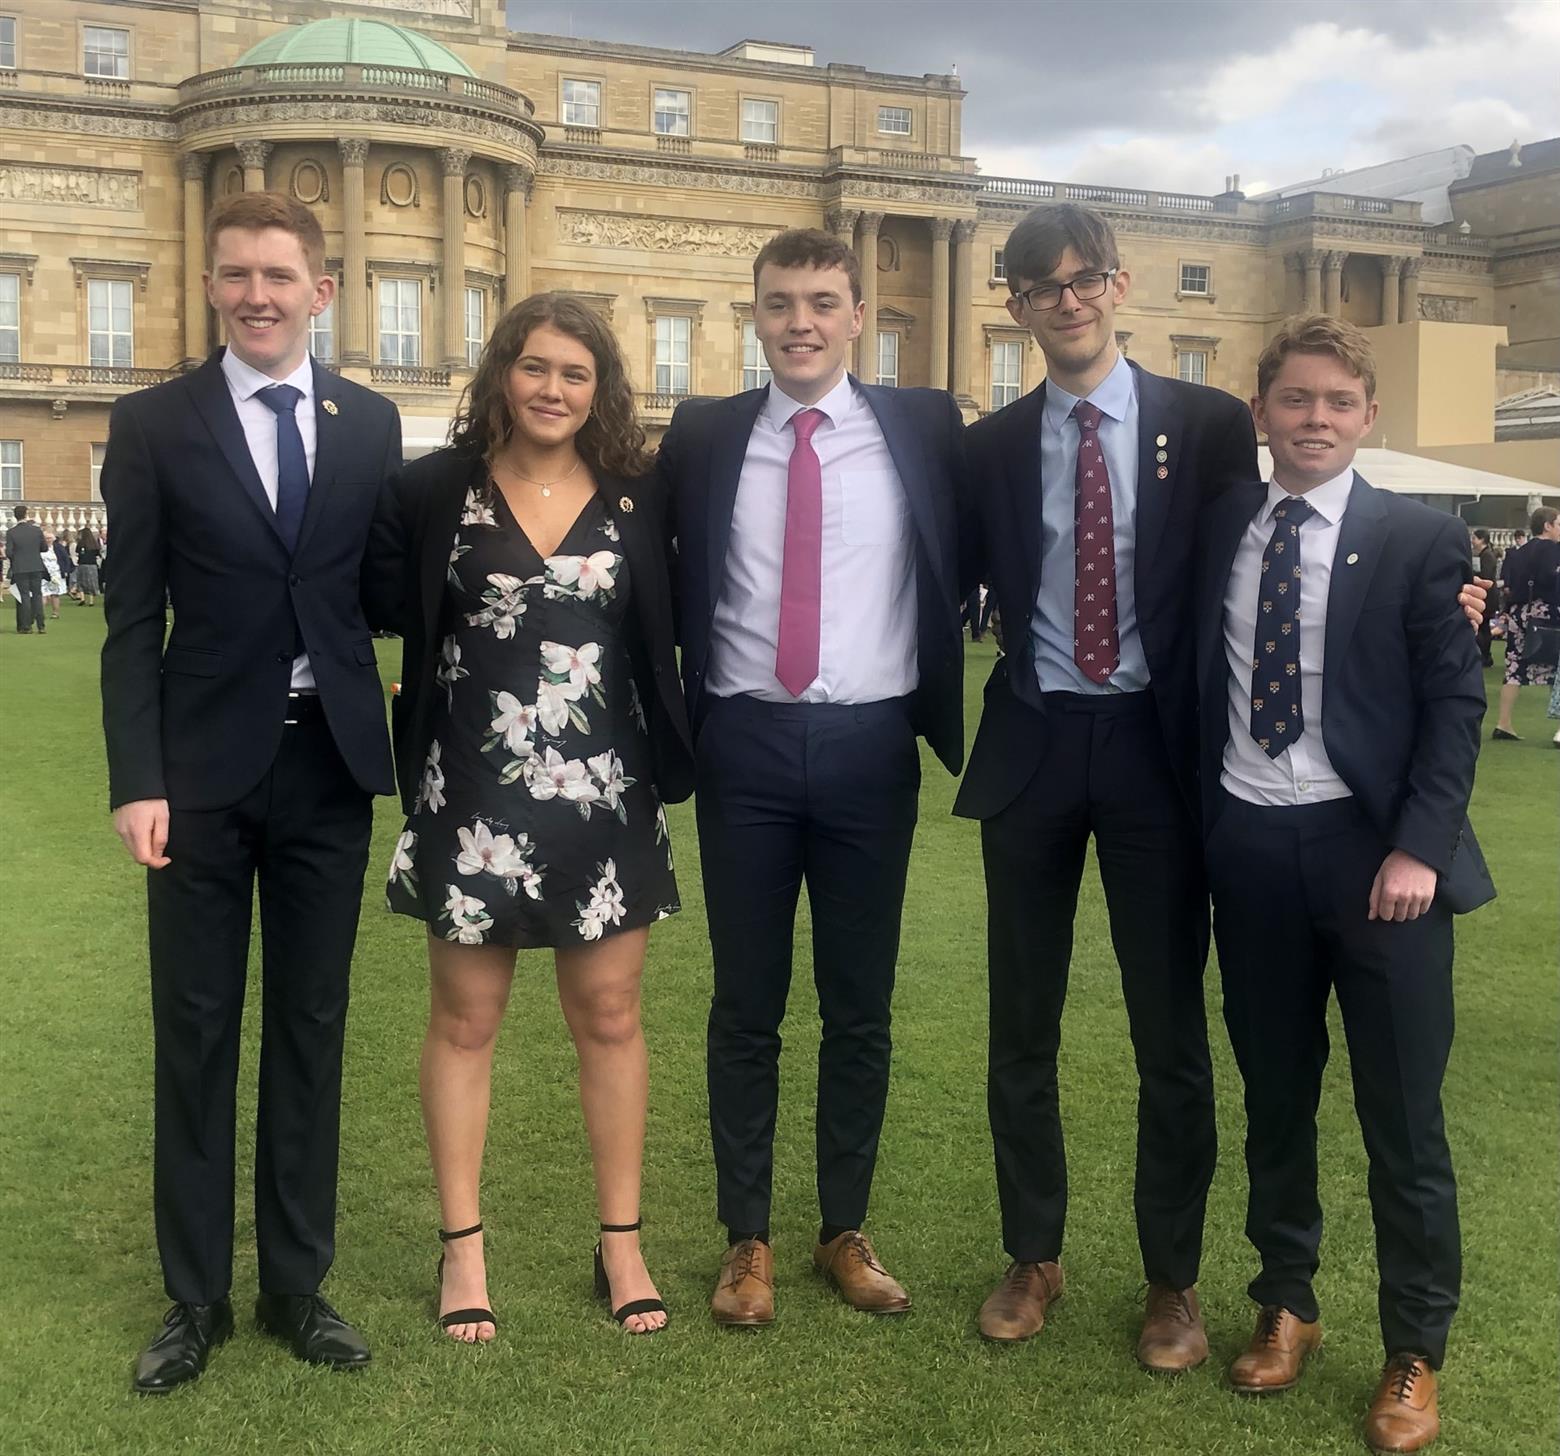 Five students receive Gold awards at Buckingham Palace